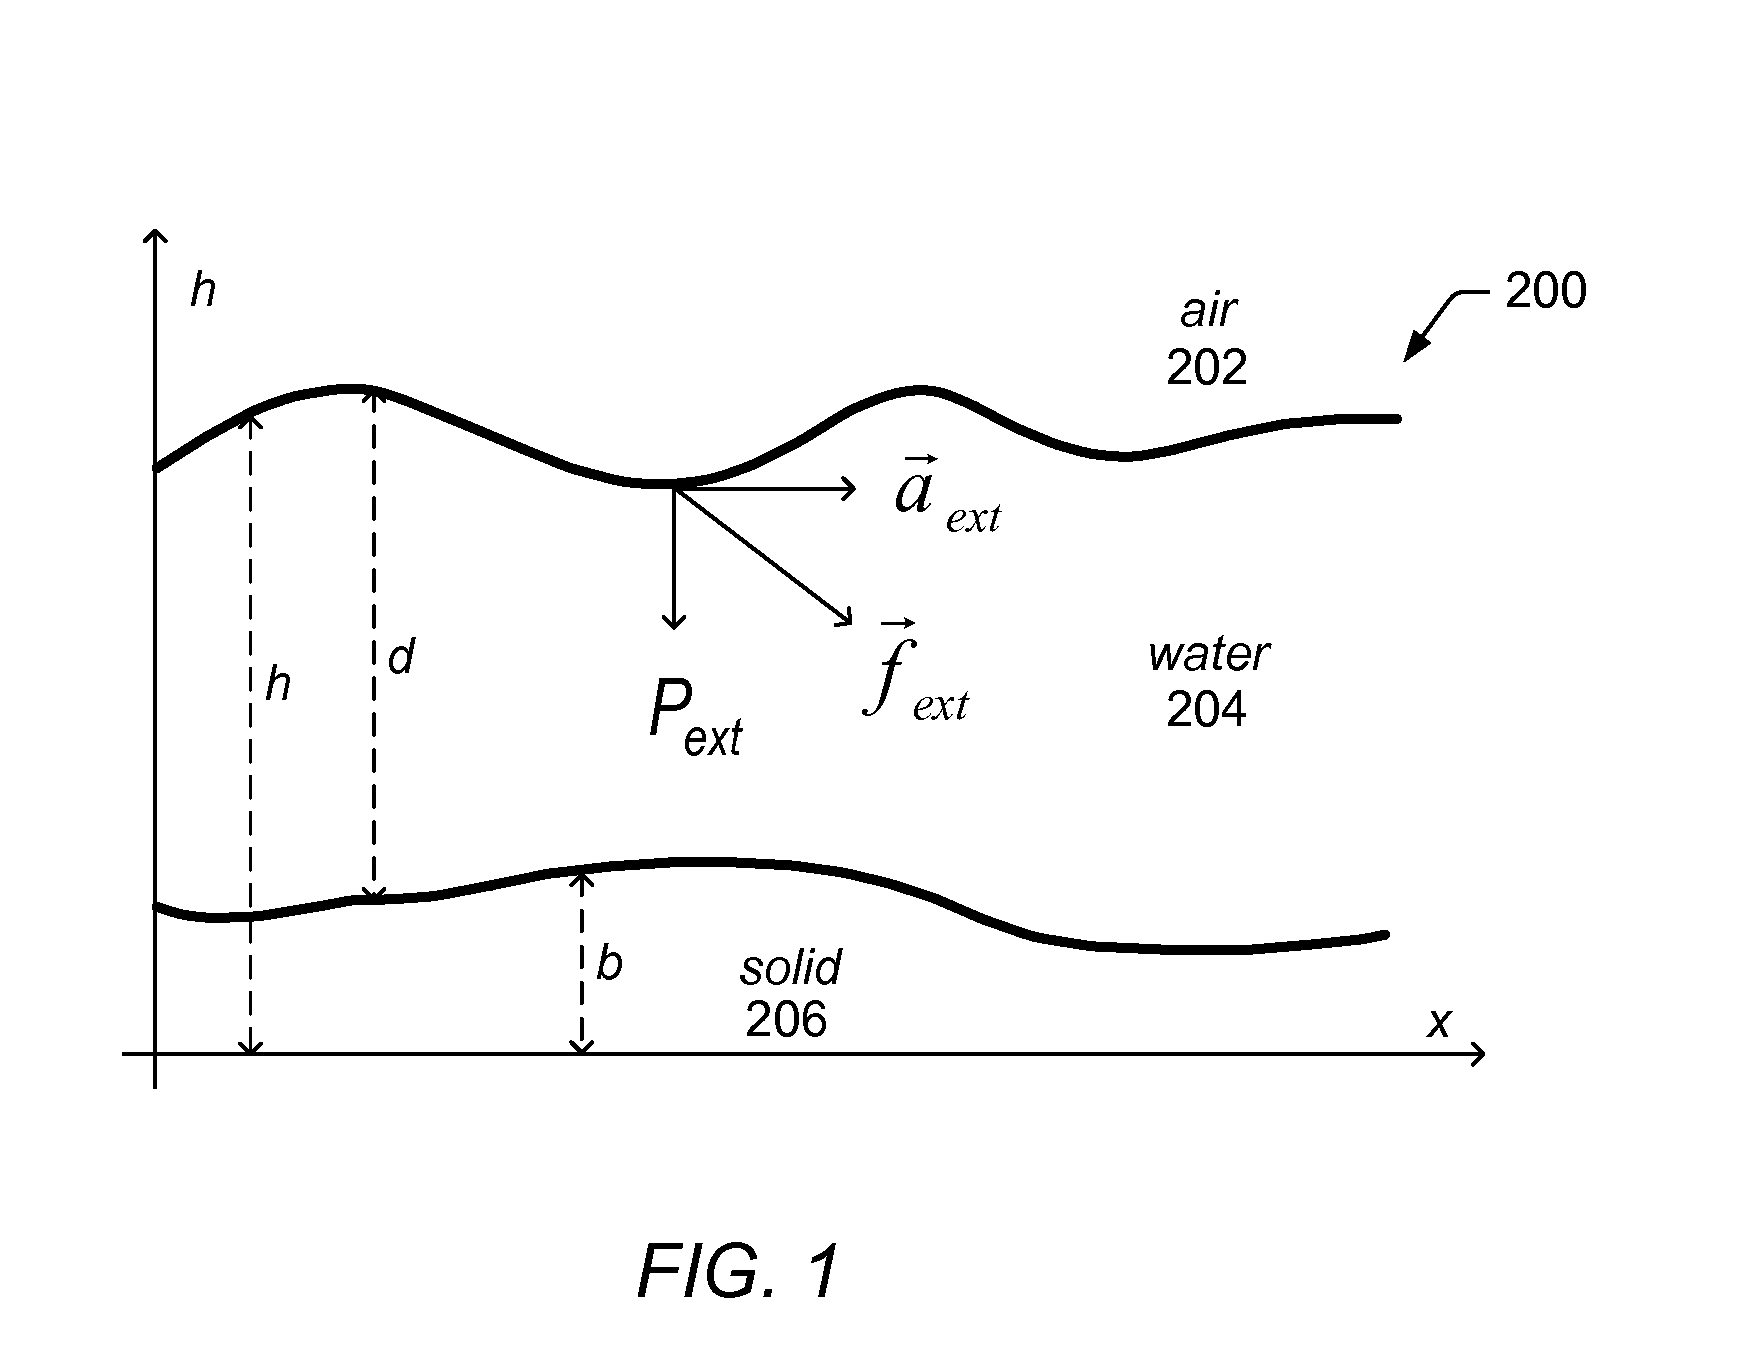 System and Method for Simulating Shallow Water Effects on Arbitrary Surfaces